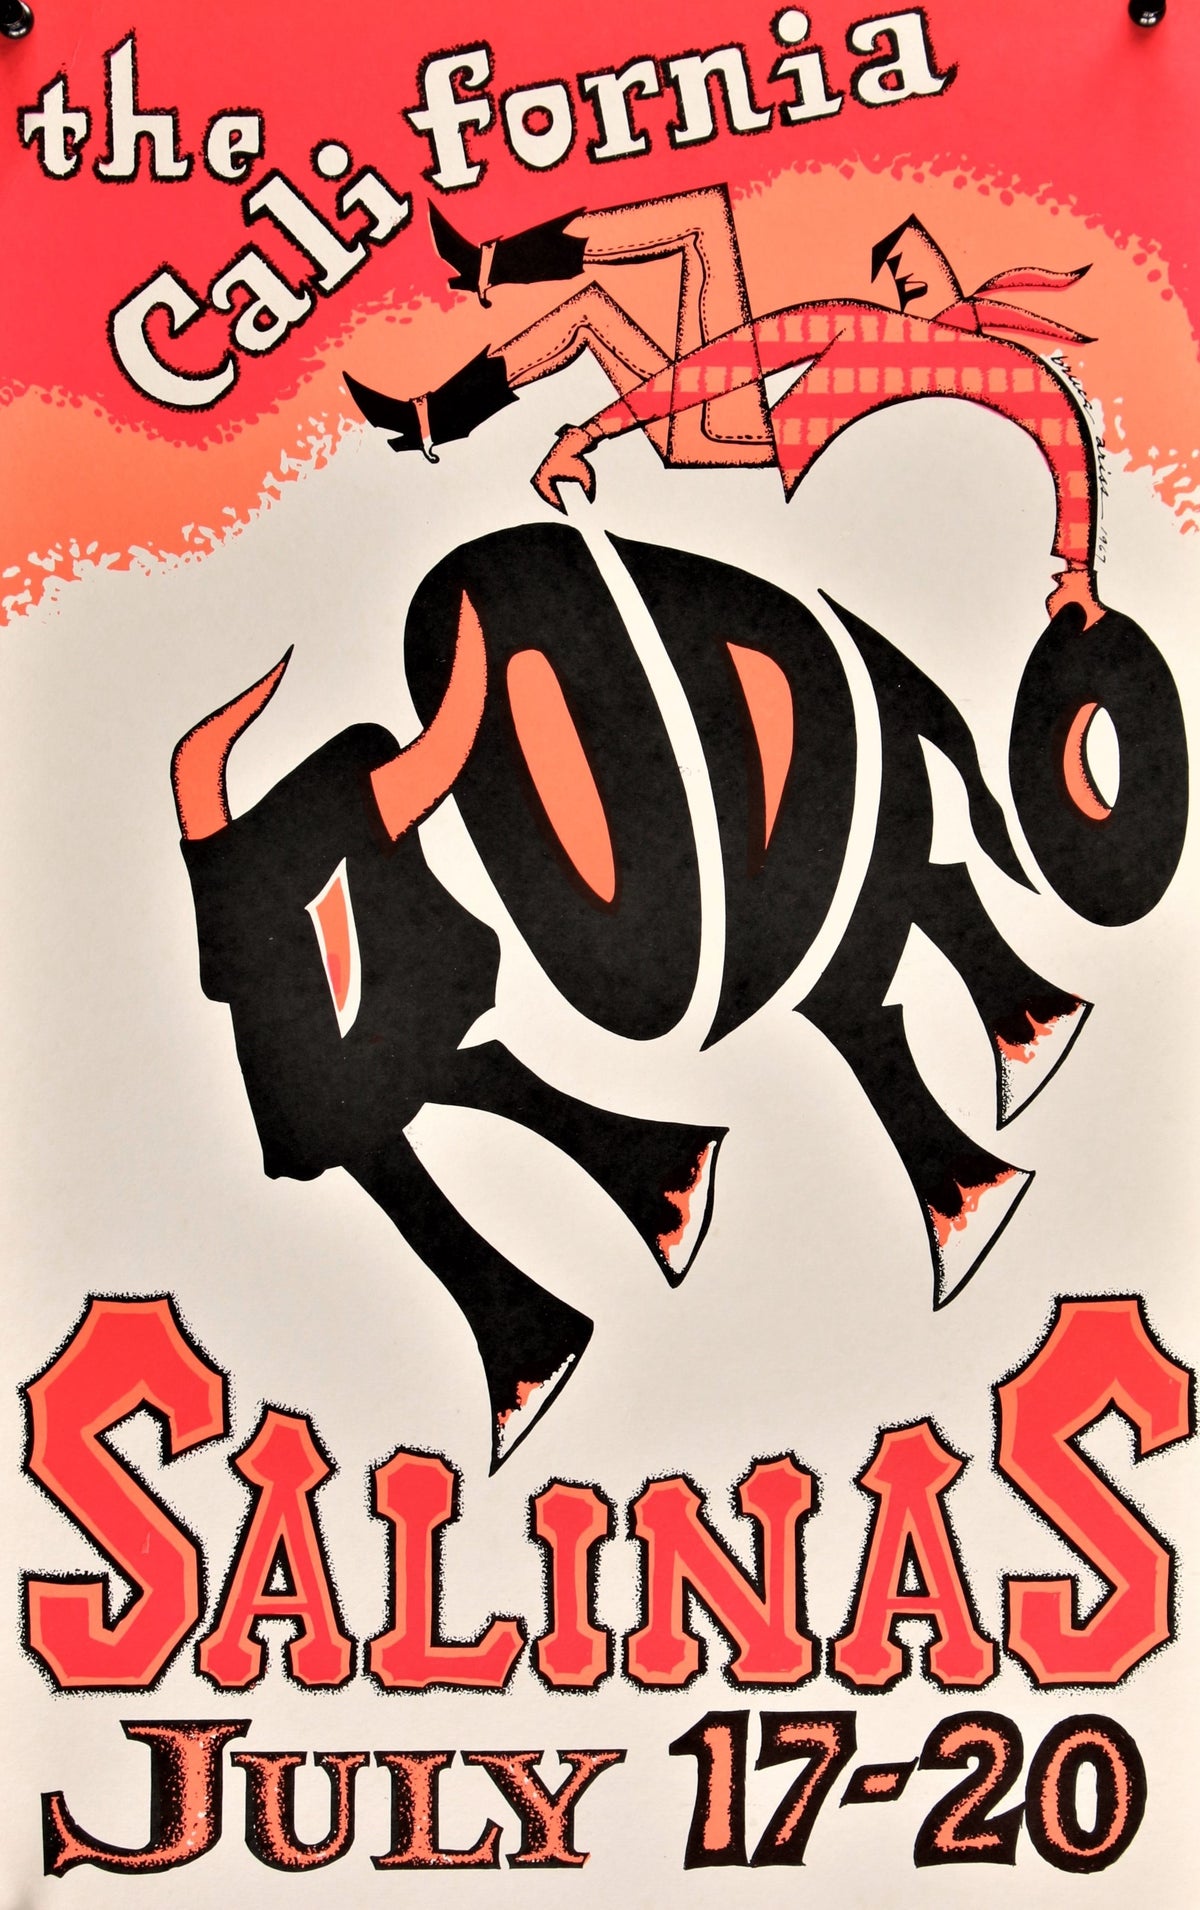 CALIFORNIA RODEO SALINAS WC 1967 great Bruce Ariss art of cowboy riding the title! - Authentic Vintage Poster